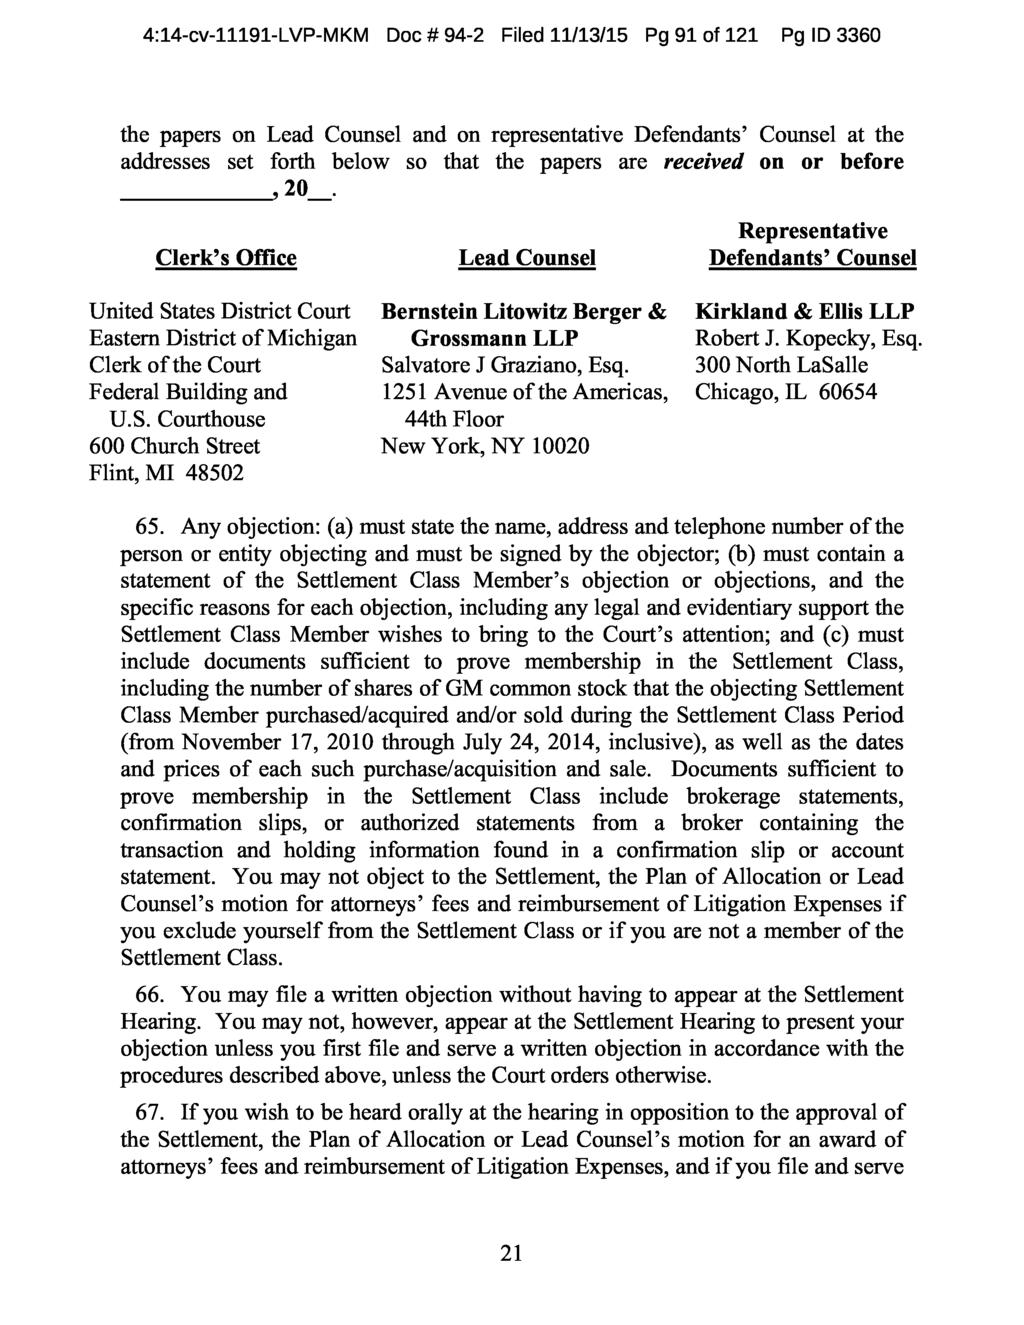 4:14-cv-11191-LVP-MKM Doc # 94-2 Filed 11/13/15 Pg 91 of 121 Pg ID 3360 the papers on Lead Counsel and on representative Defendants' Counsel at the addresses set forth below so that the papers are